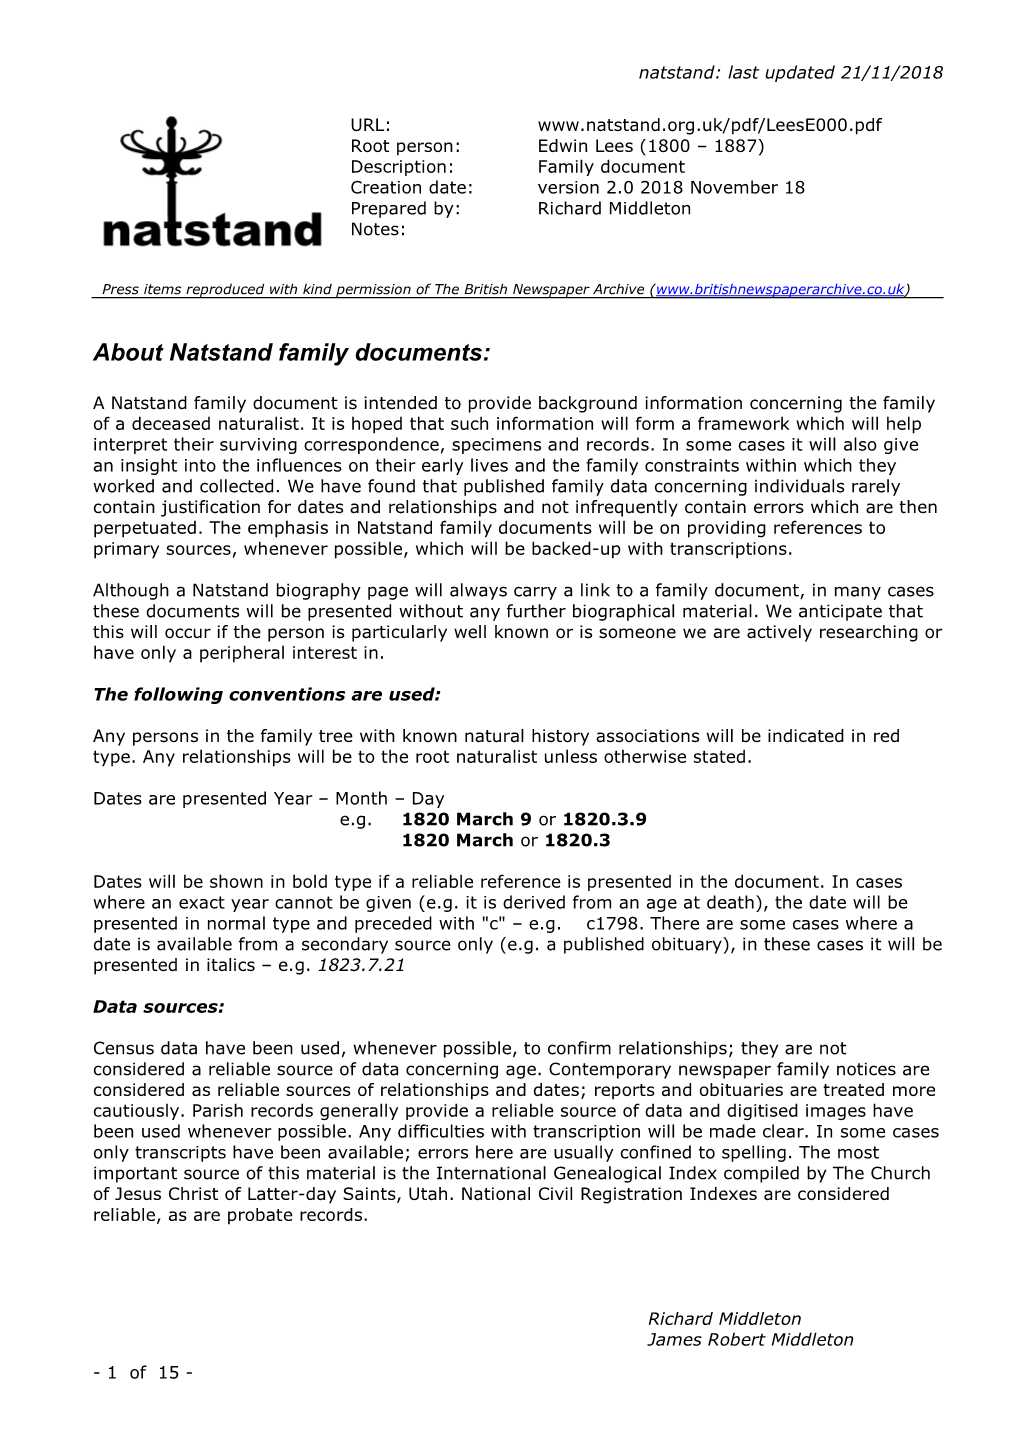 About Natstand Family Documents